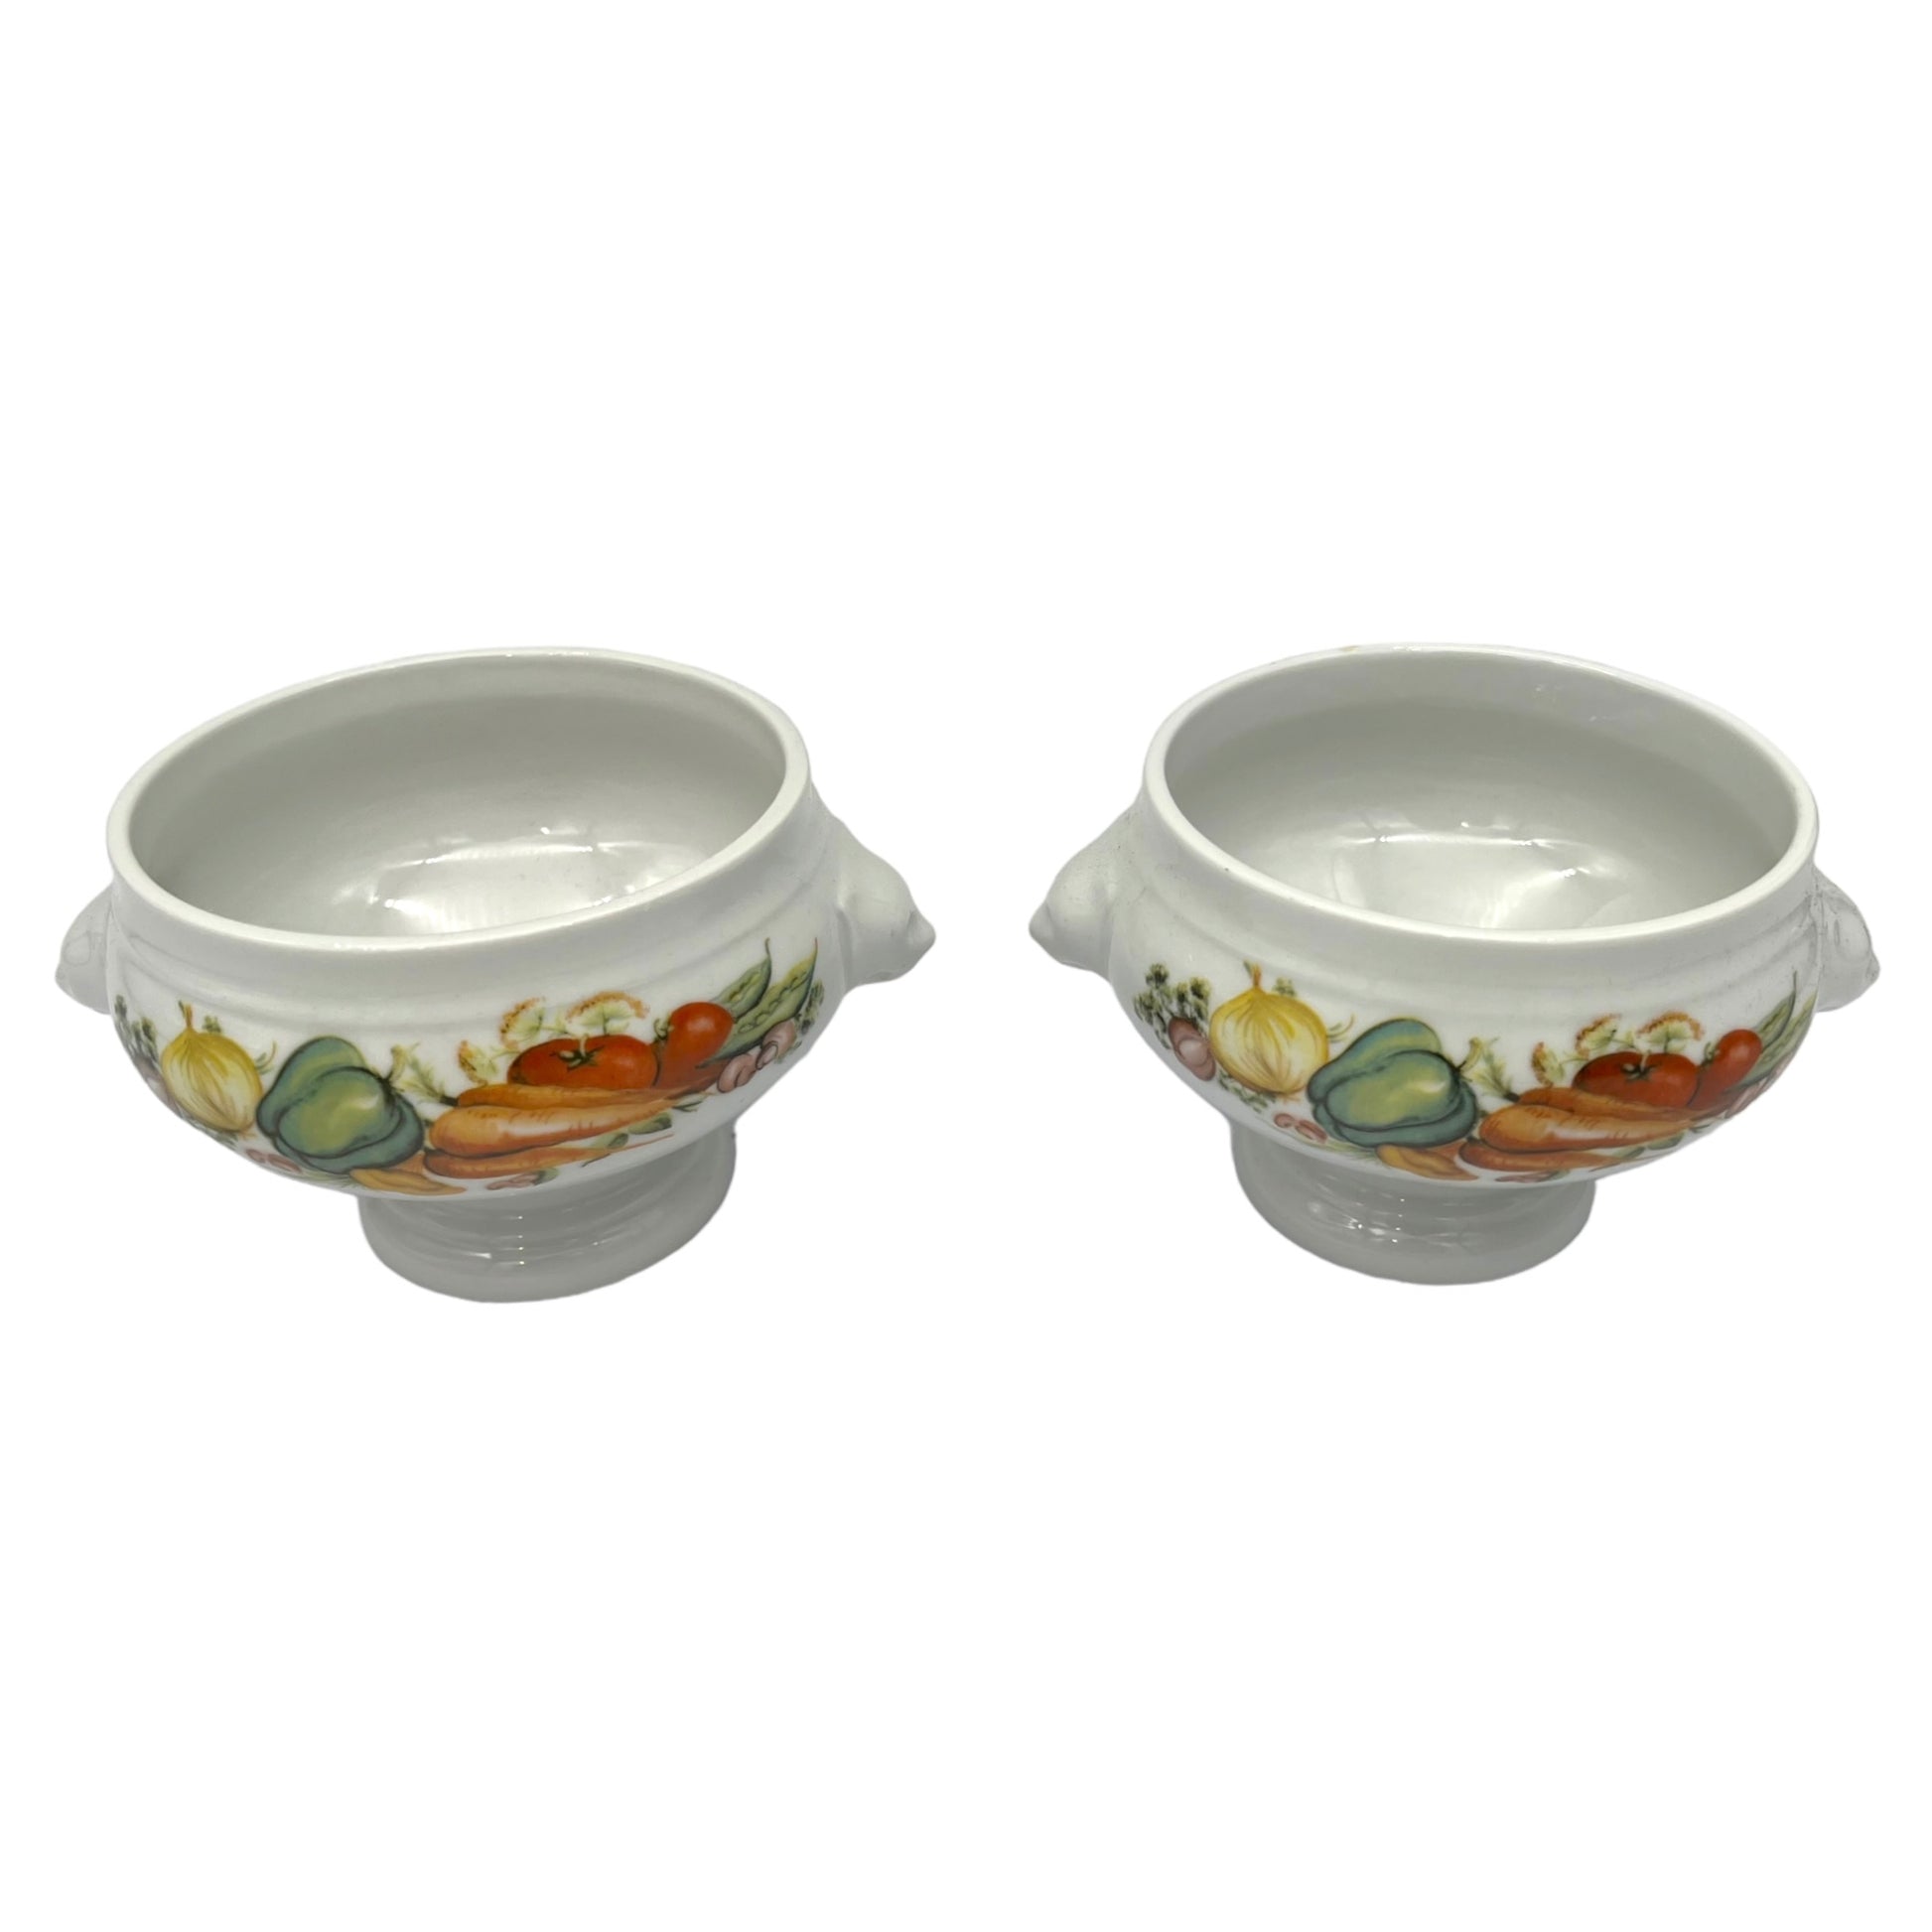 image 3 pair of German traditional soup bowls